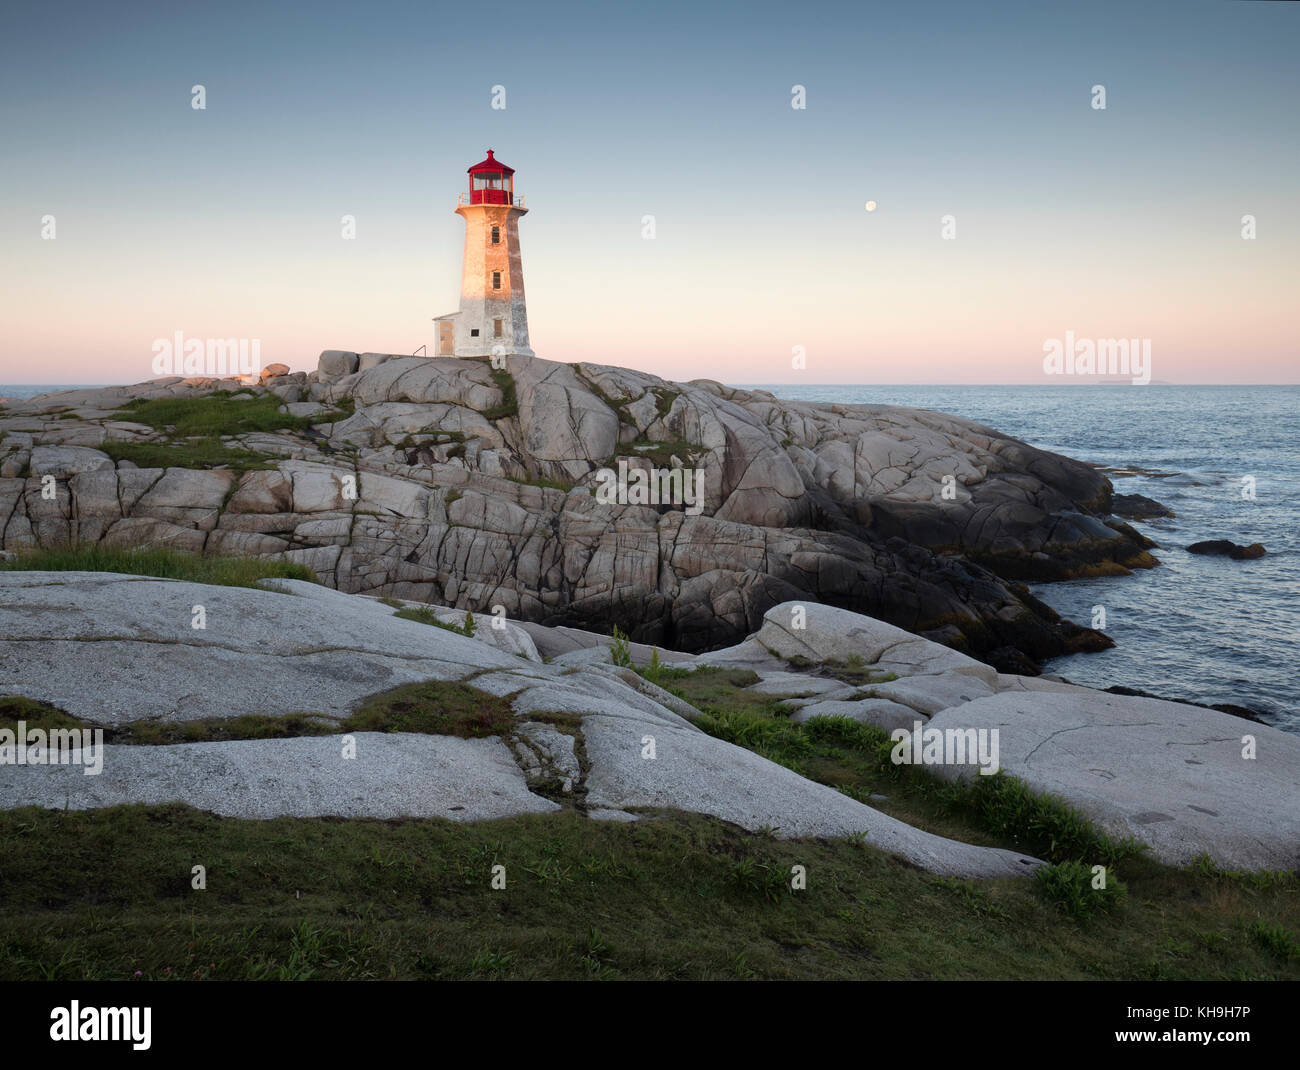 Lighthouse and granite rock formations at Peggy’s Cove, Nova Scotia Stock Photo